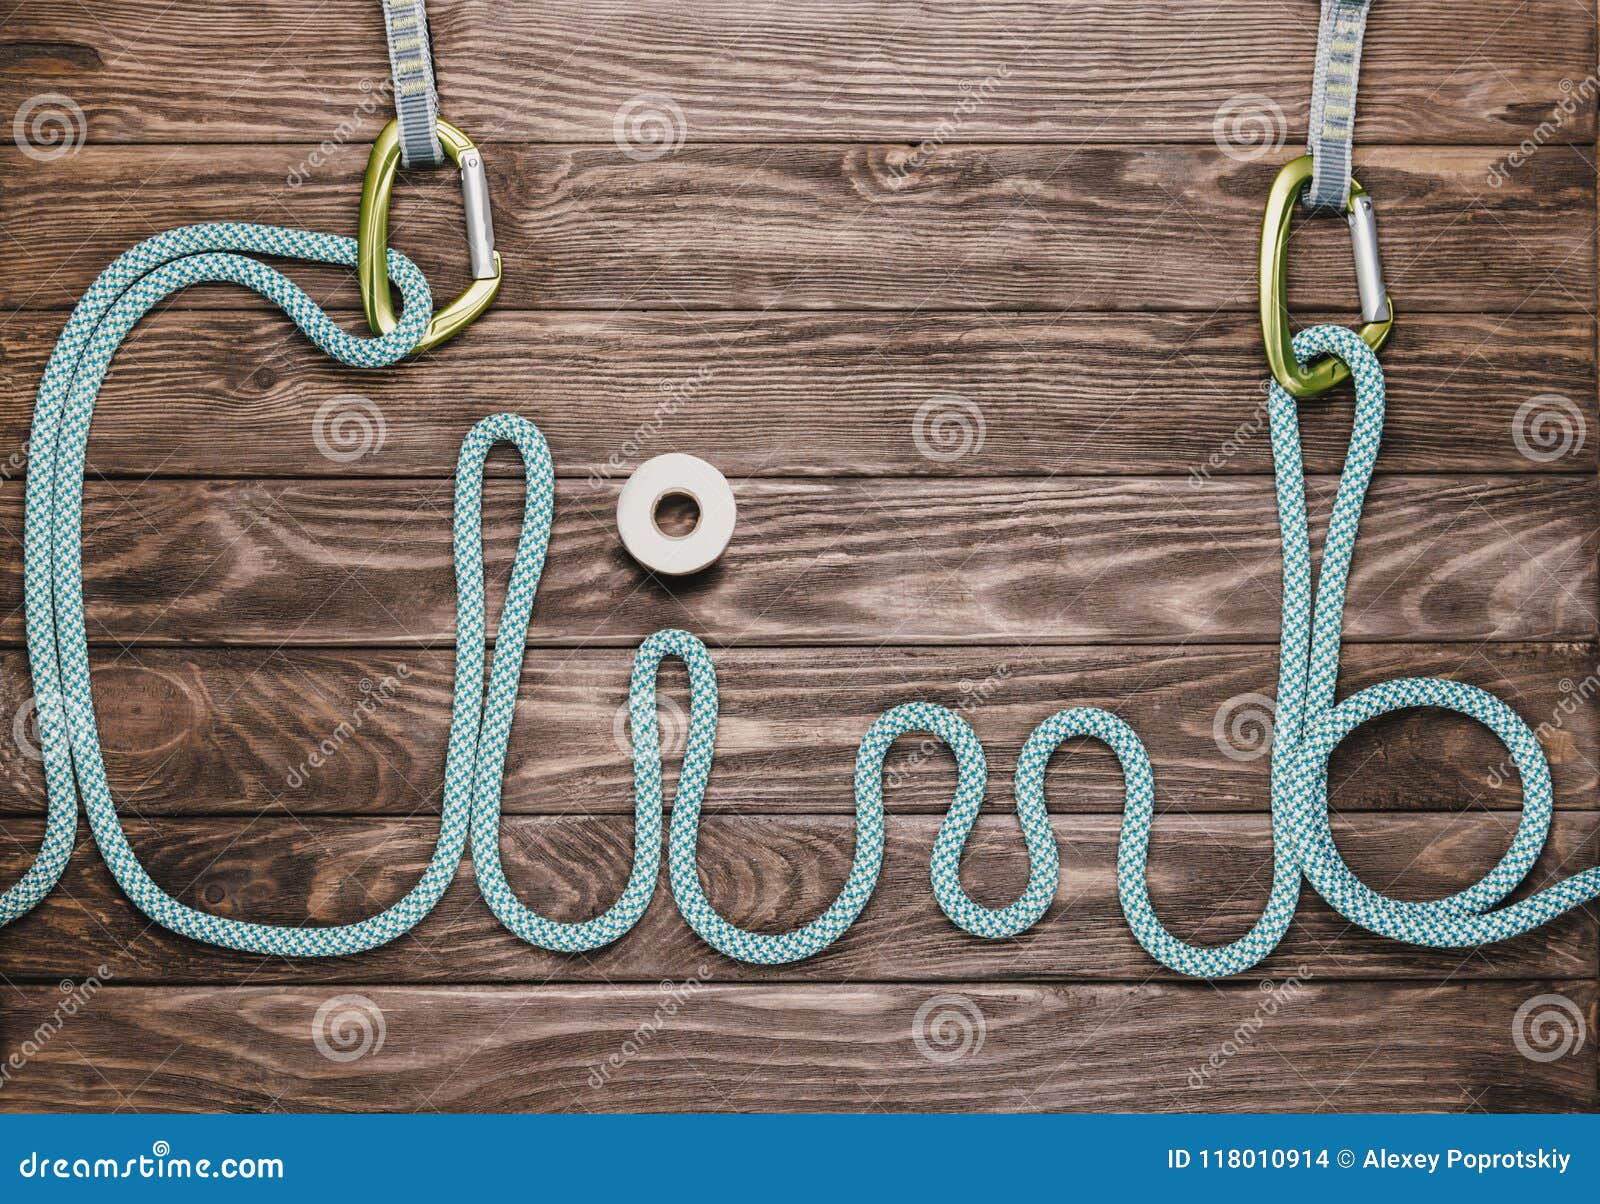 https://thumbs.dreamstime.com/z/rope-shape-word-climb-rope-shape-word-climb-carbines-wooden-background-top-view-118010914.jpg